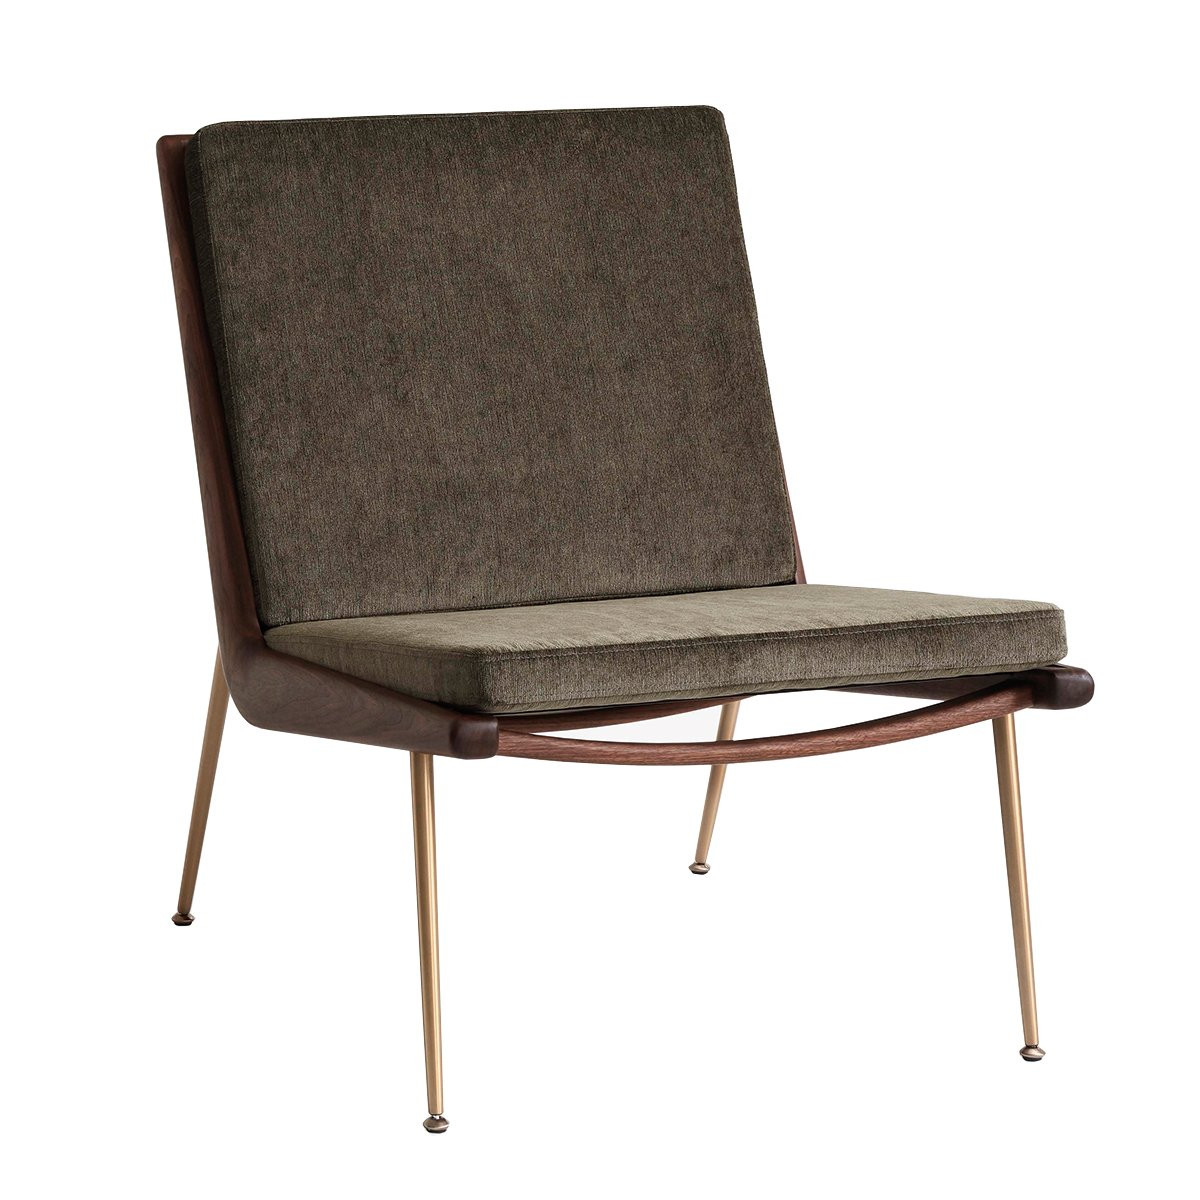 &Tradition Boomerang Fauteuil